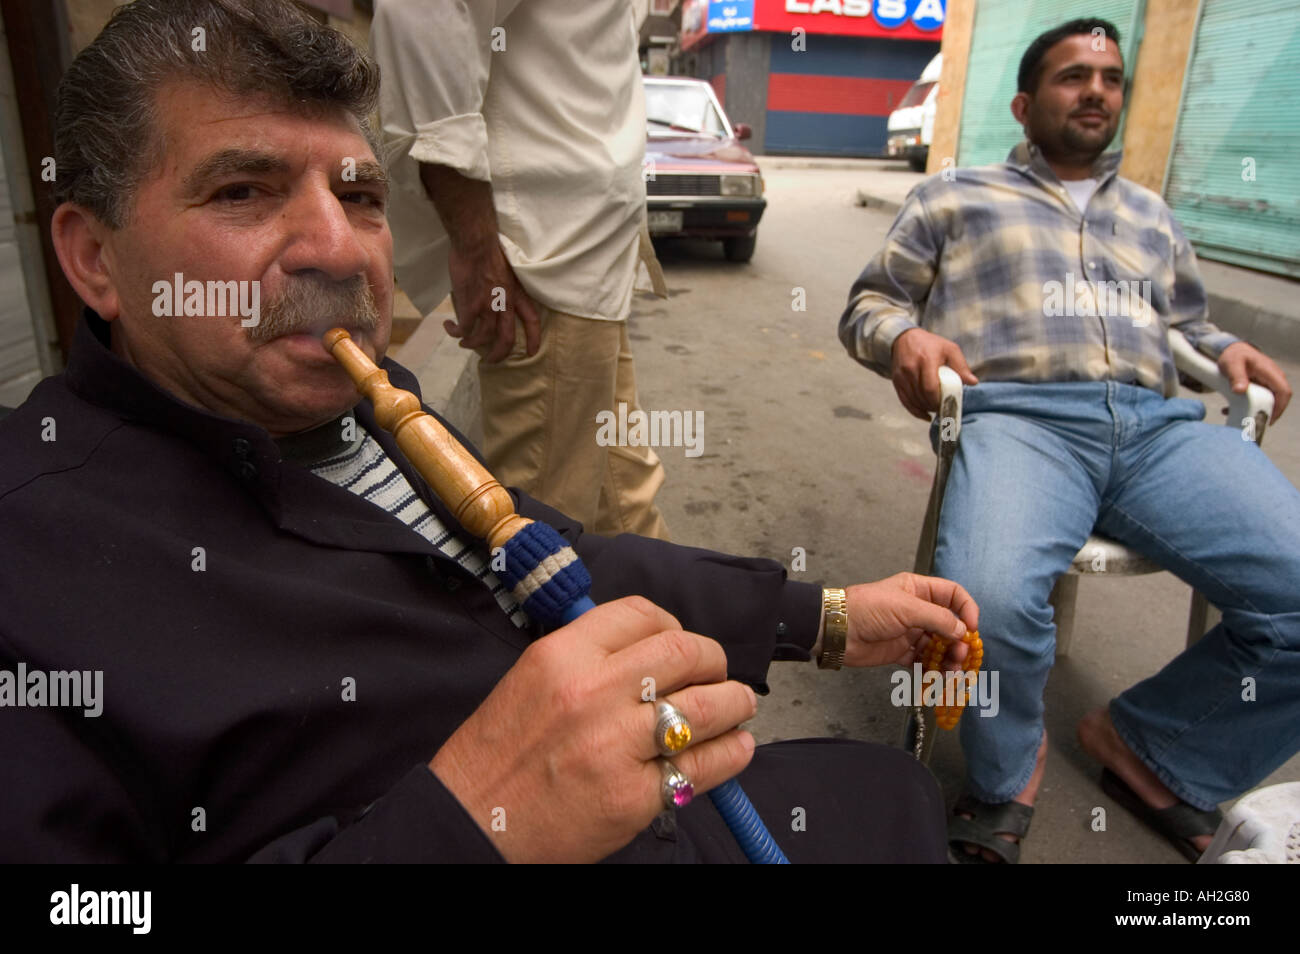 man smoking water pipe Aleppo Haleb Syria Middle East Stock Photo